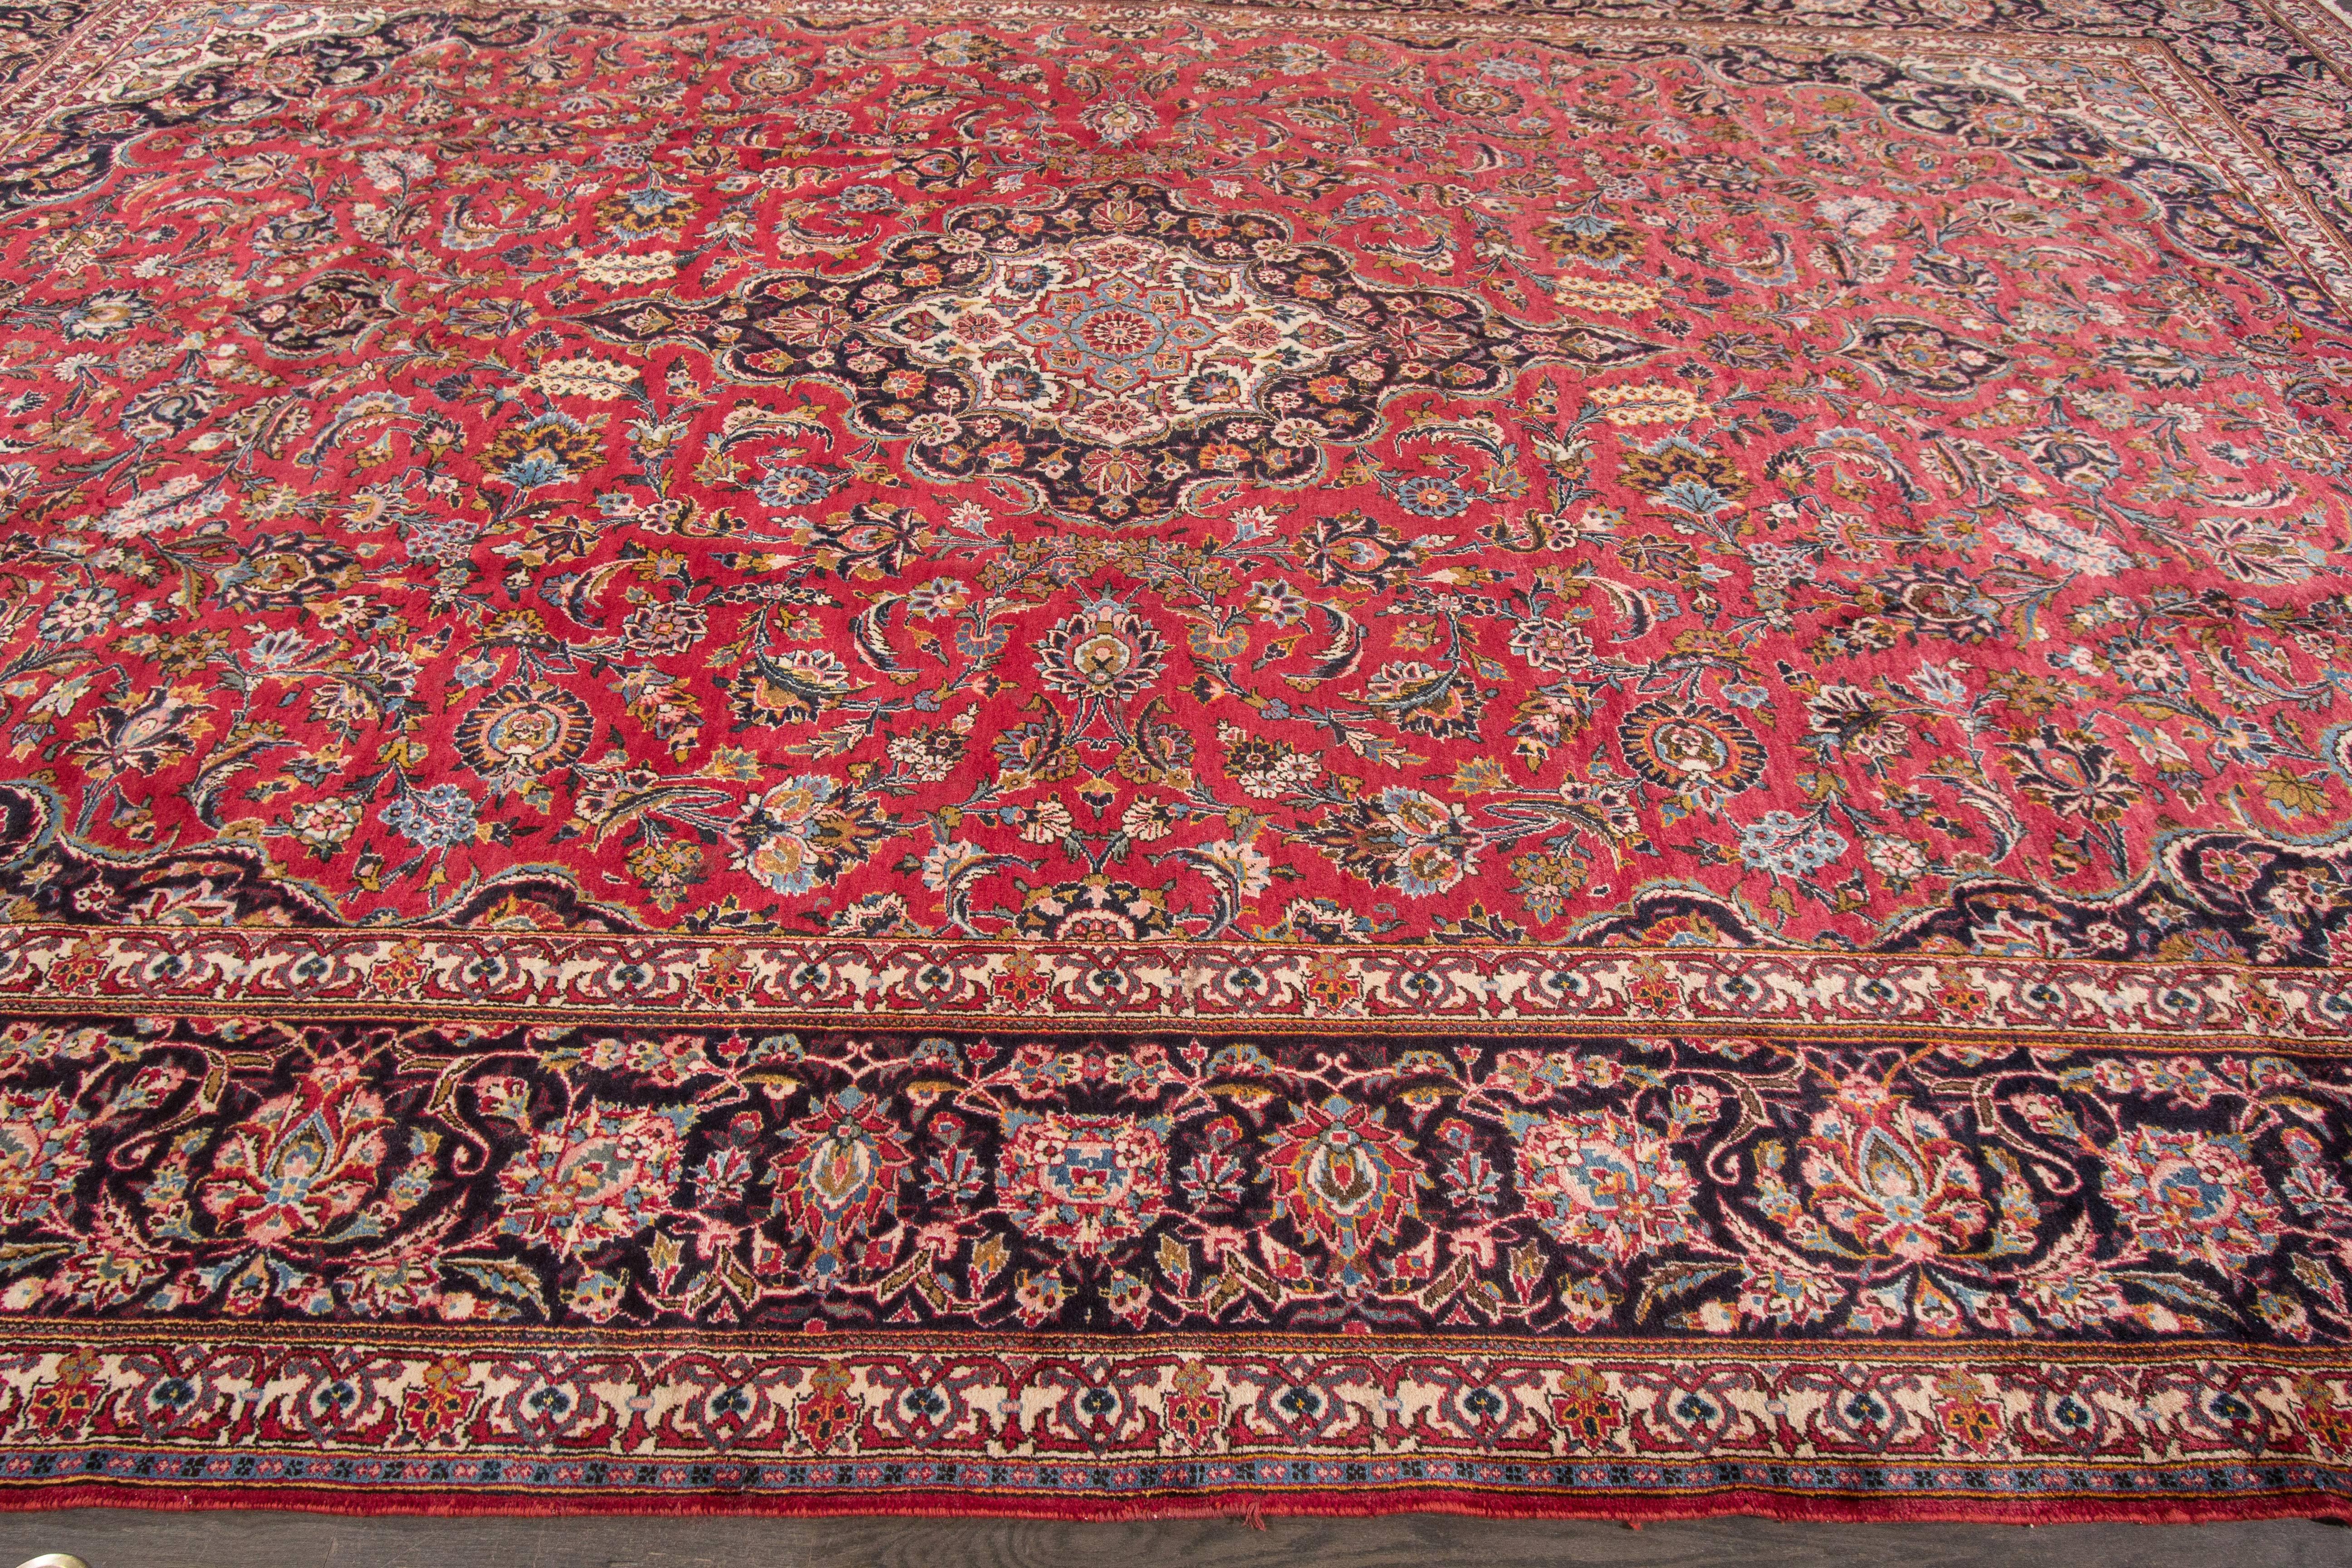 A hand-knotted vintage Kashan rug with a floral medallion design on a red field. Accents of black, blue and ivory throughout the piece. The size of this piece is 10'9 x 16'7.